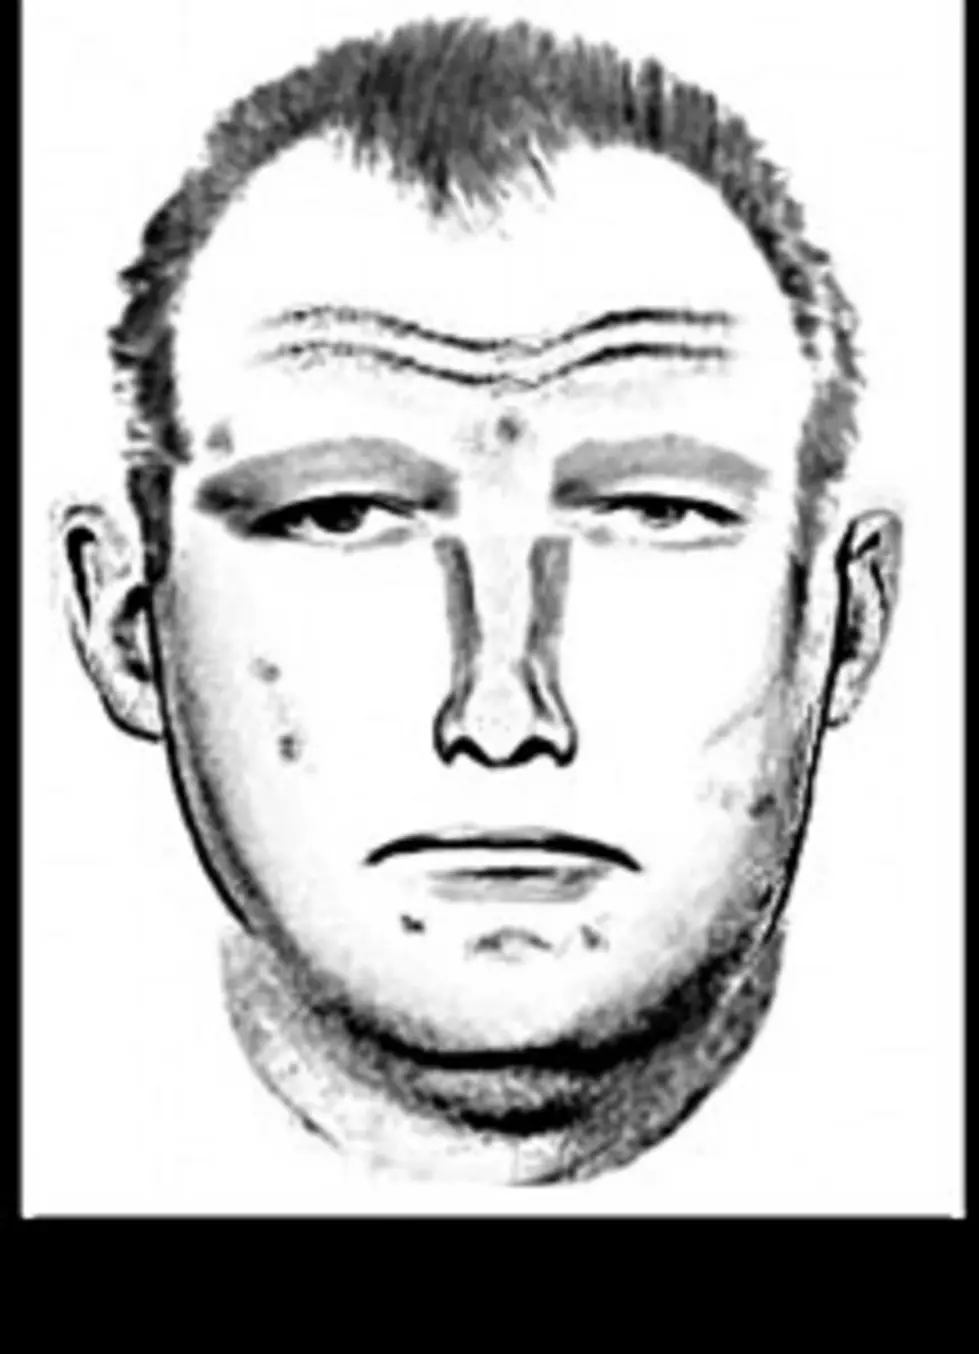 State Police Investigating Sexual Assault In Kirkland